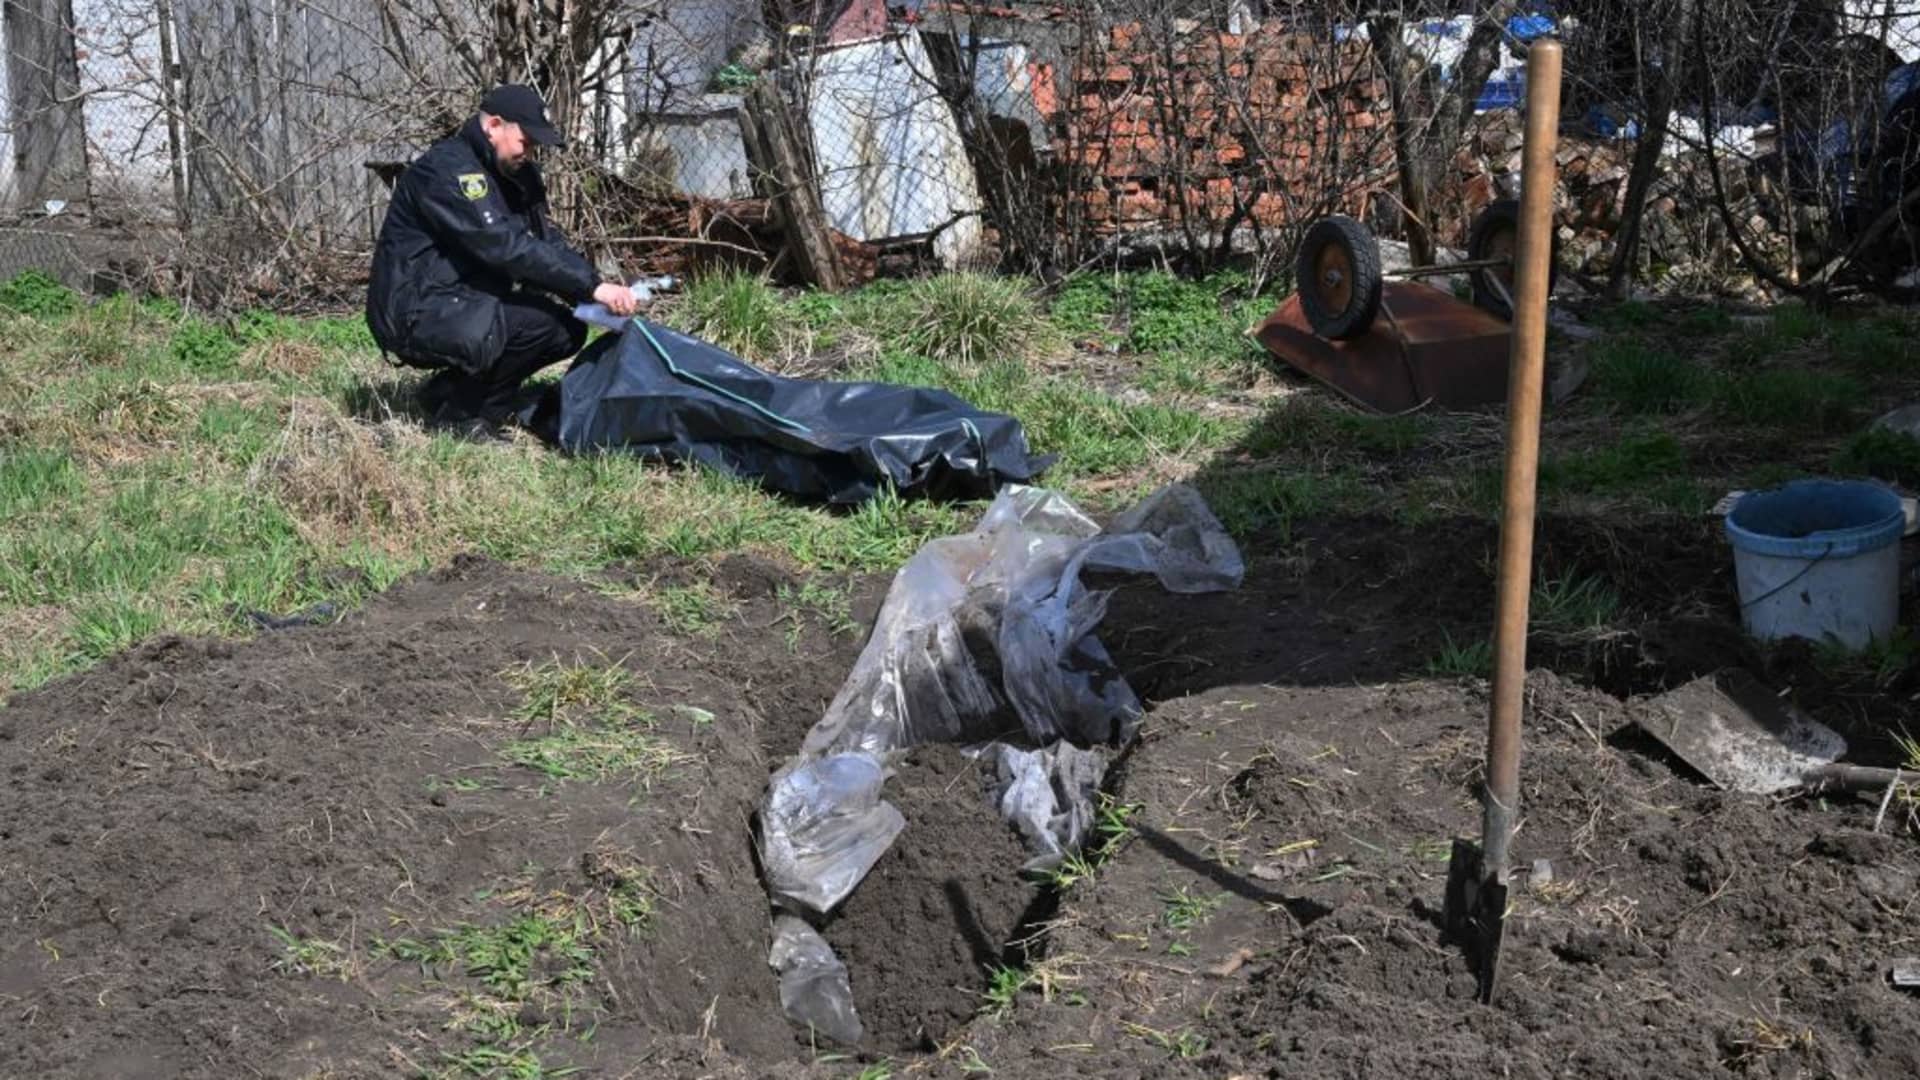 EDITORS NOTE: Graphic content / A policeman attends to the body of a civilian man buried in the yard of his house after his was exhumed in Andriivka village, Kyiv region, on April 11, 2022.